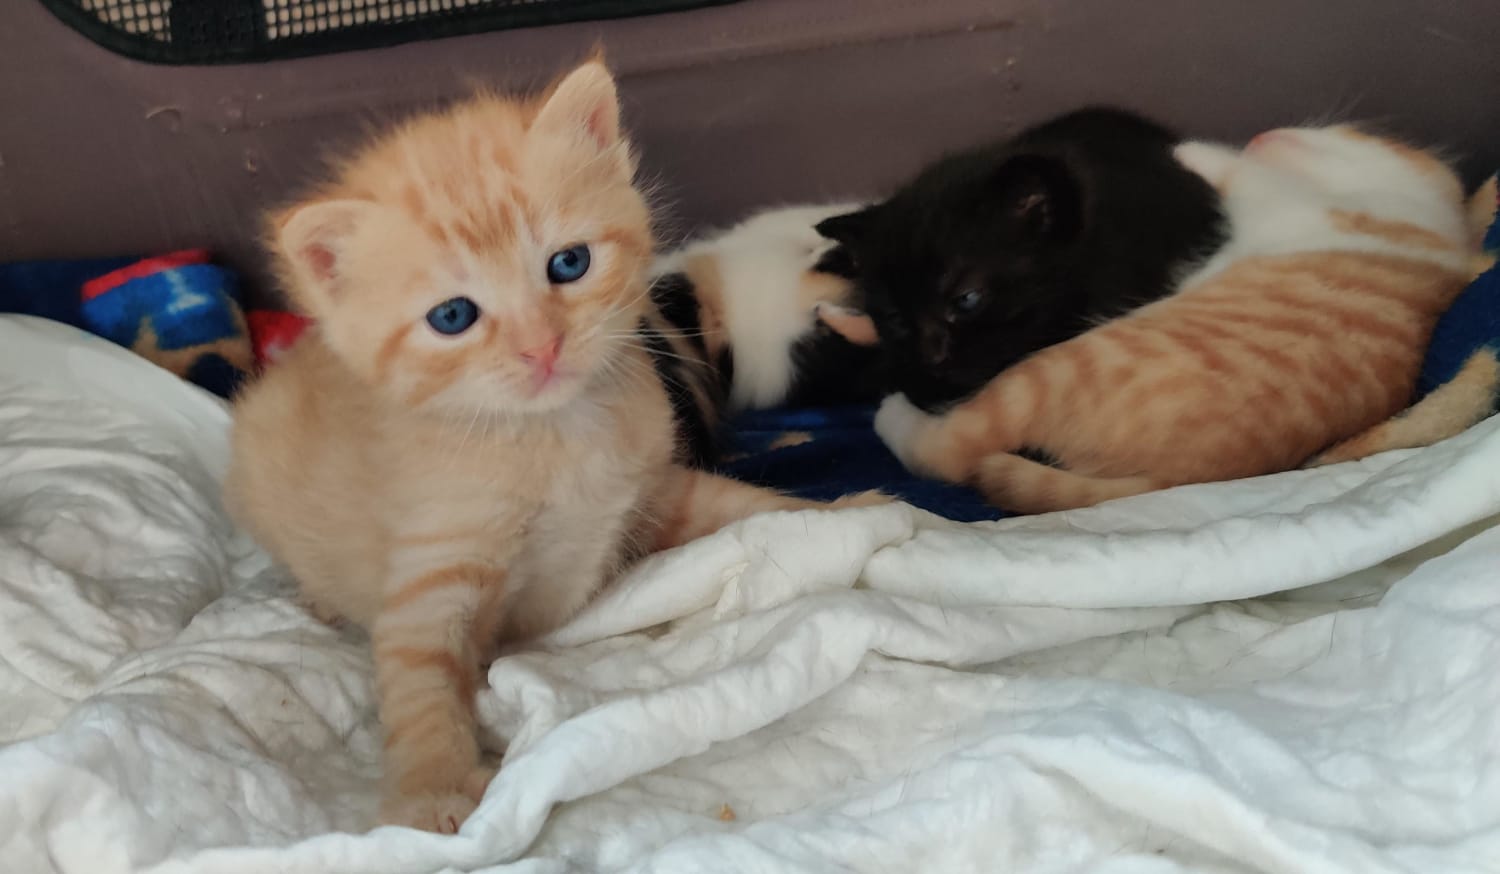 These tiny fugitives were captured on Thursday alongside their mother and found guilty on 4 counts of illegal smolness. The entire family has been sentenced to life in comfort and many cuddles.